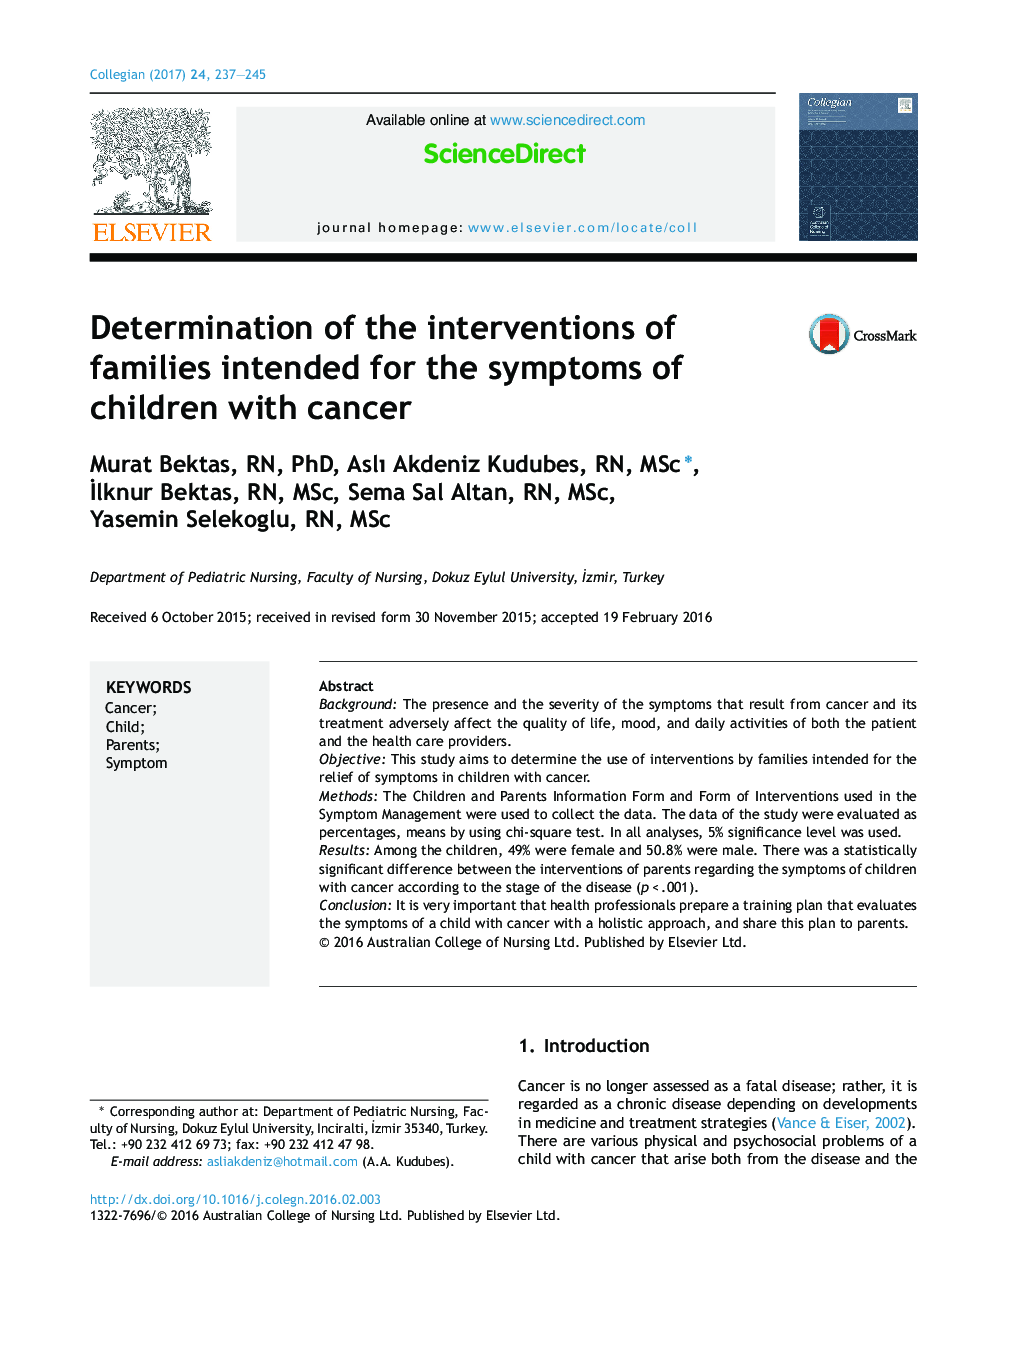 Determination of the interventions of families intended for the symptoms of children with cancer